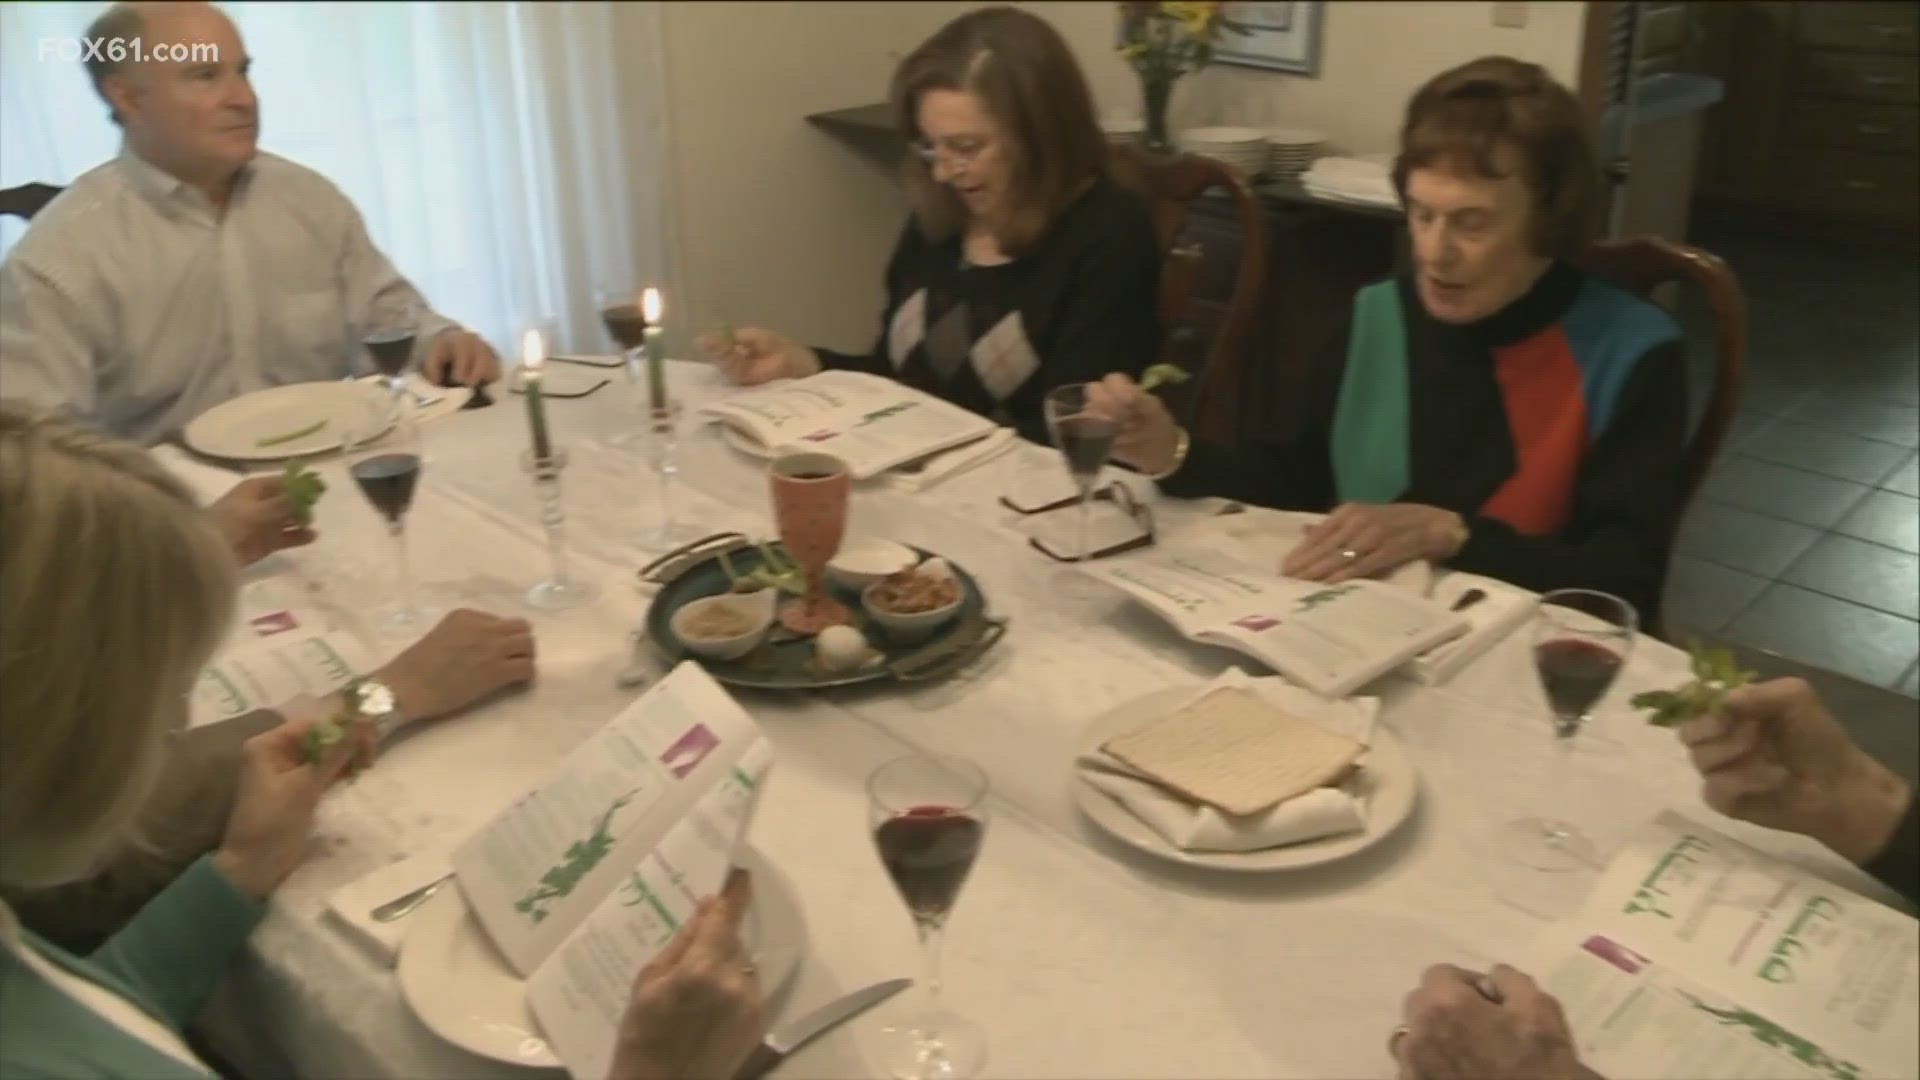 Passover, which begins Wednesday, April 5, is celebrated with a Seder. Serving matzah and wine, among other traditions.